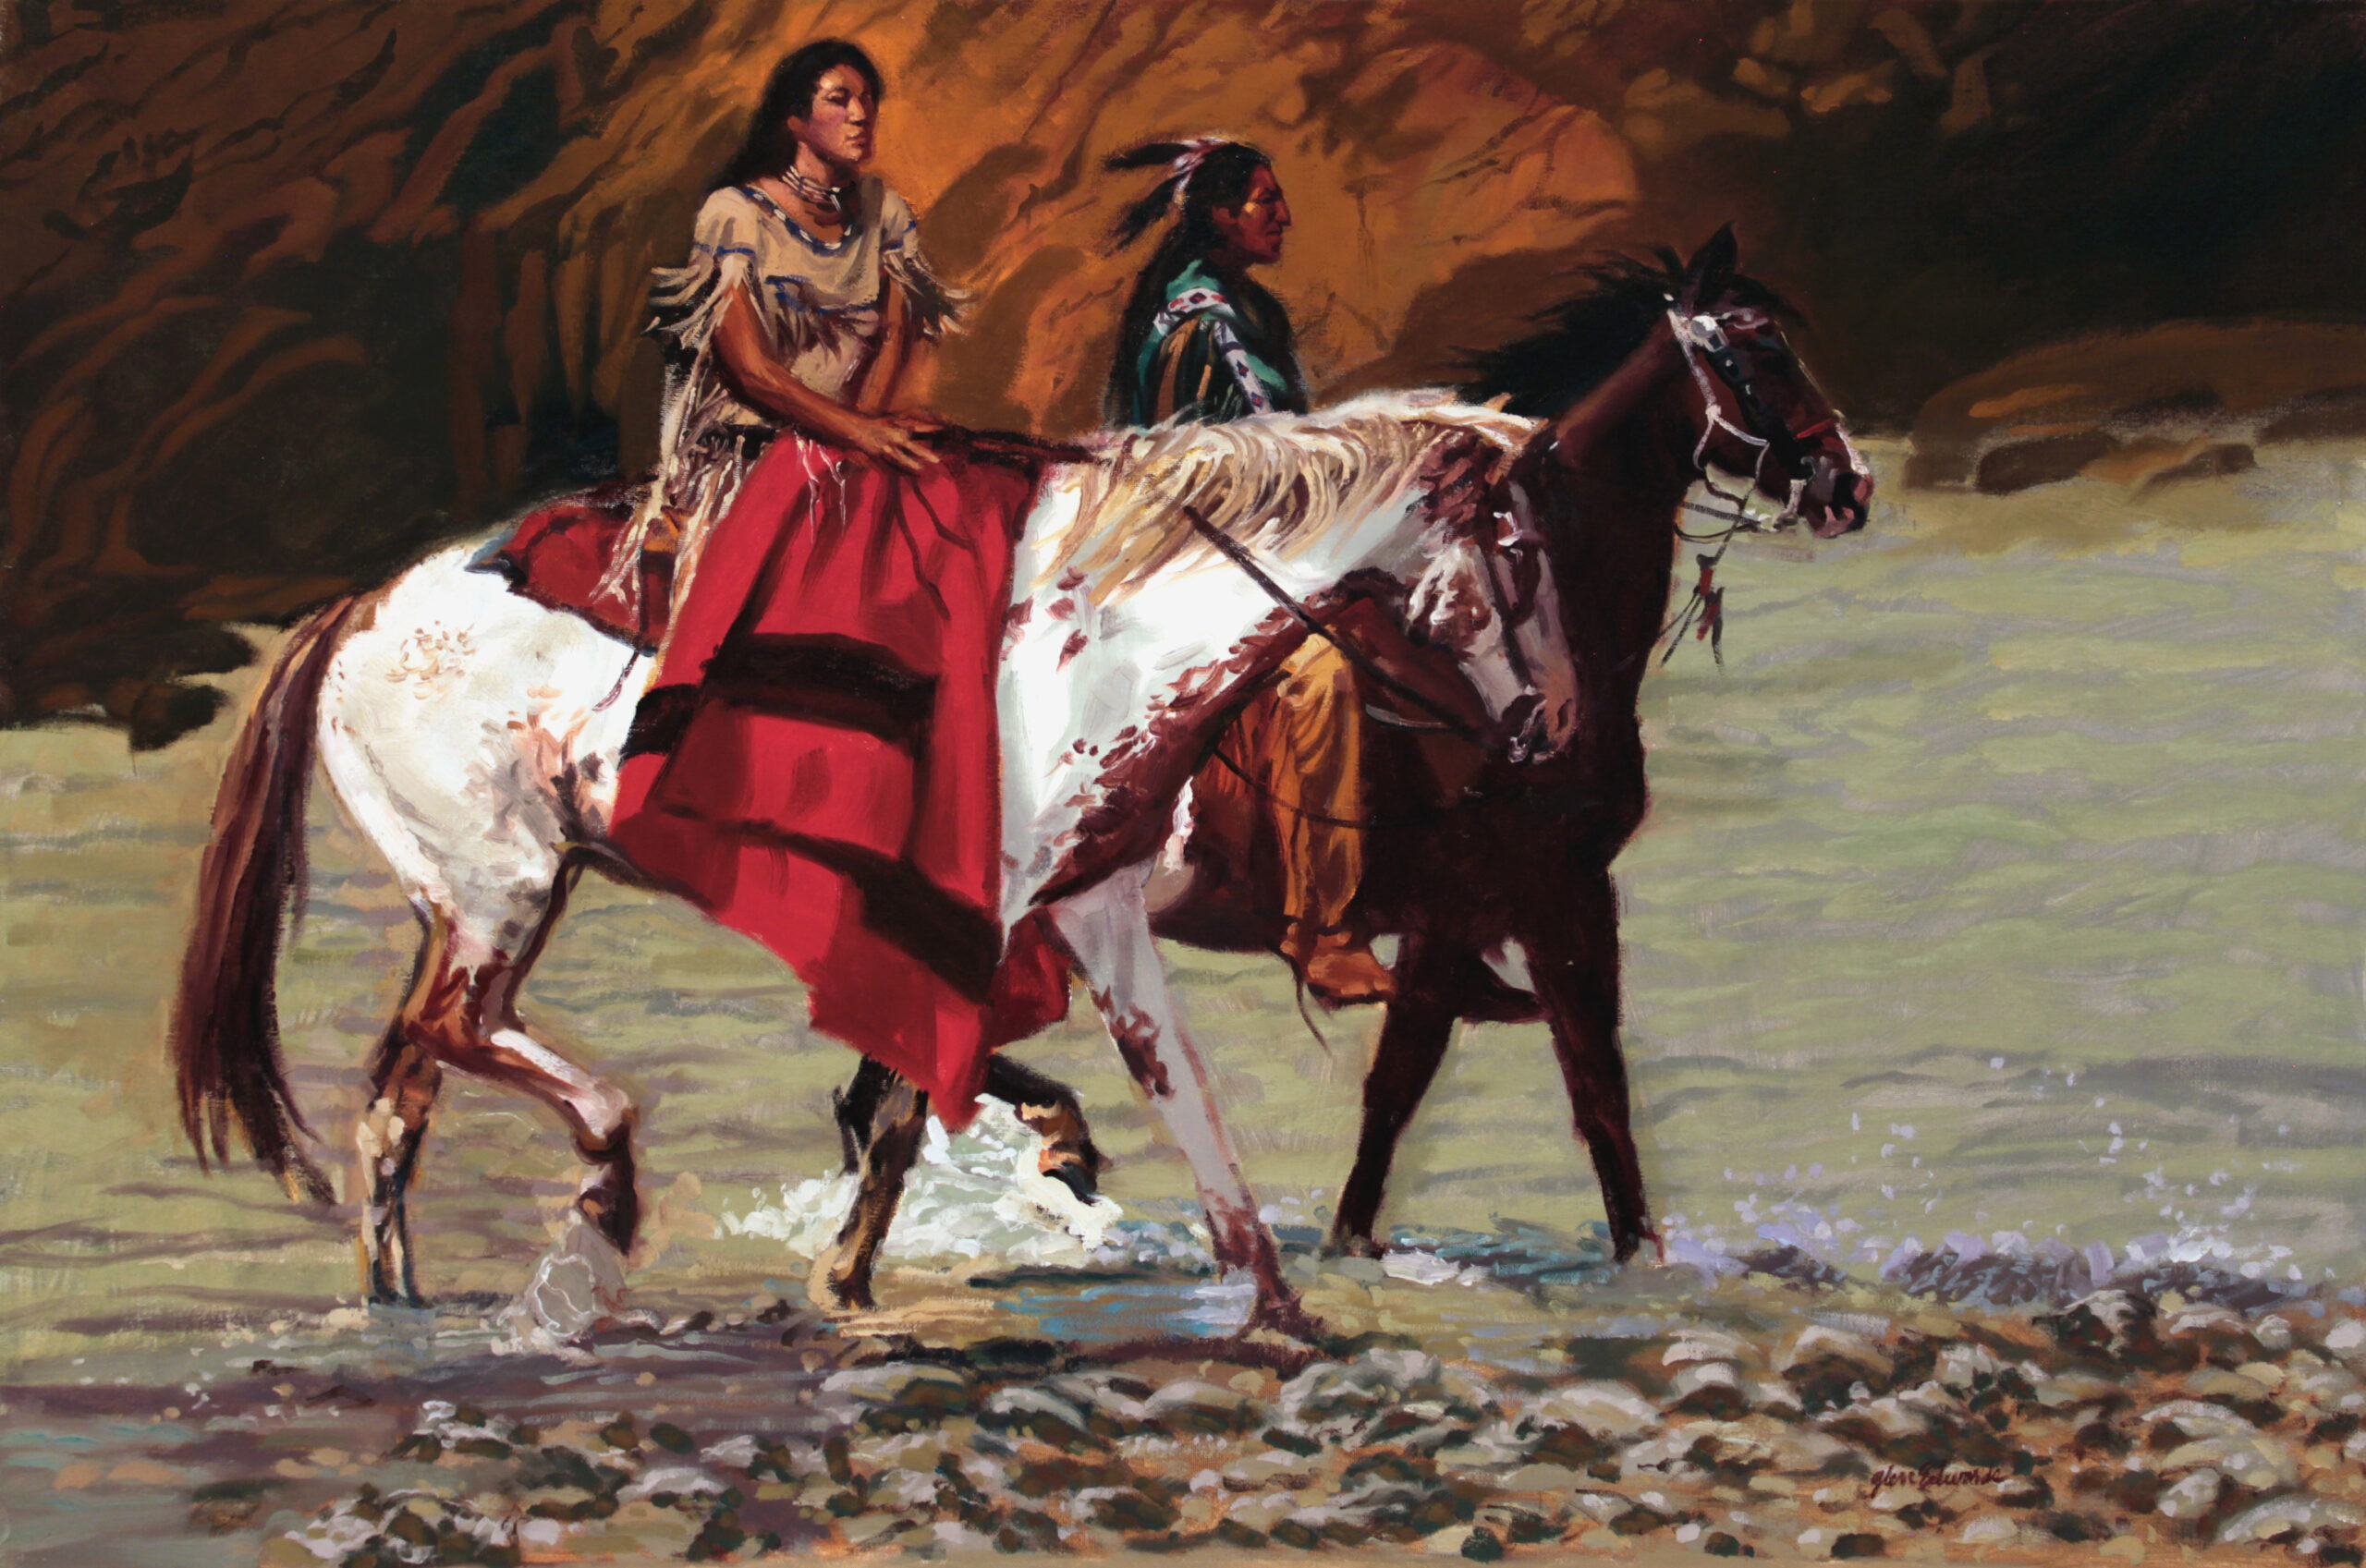 image of a male and a female native american. The female has a large blanket across her lap